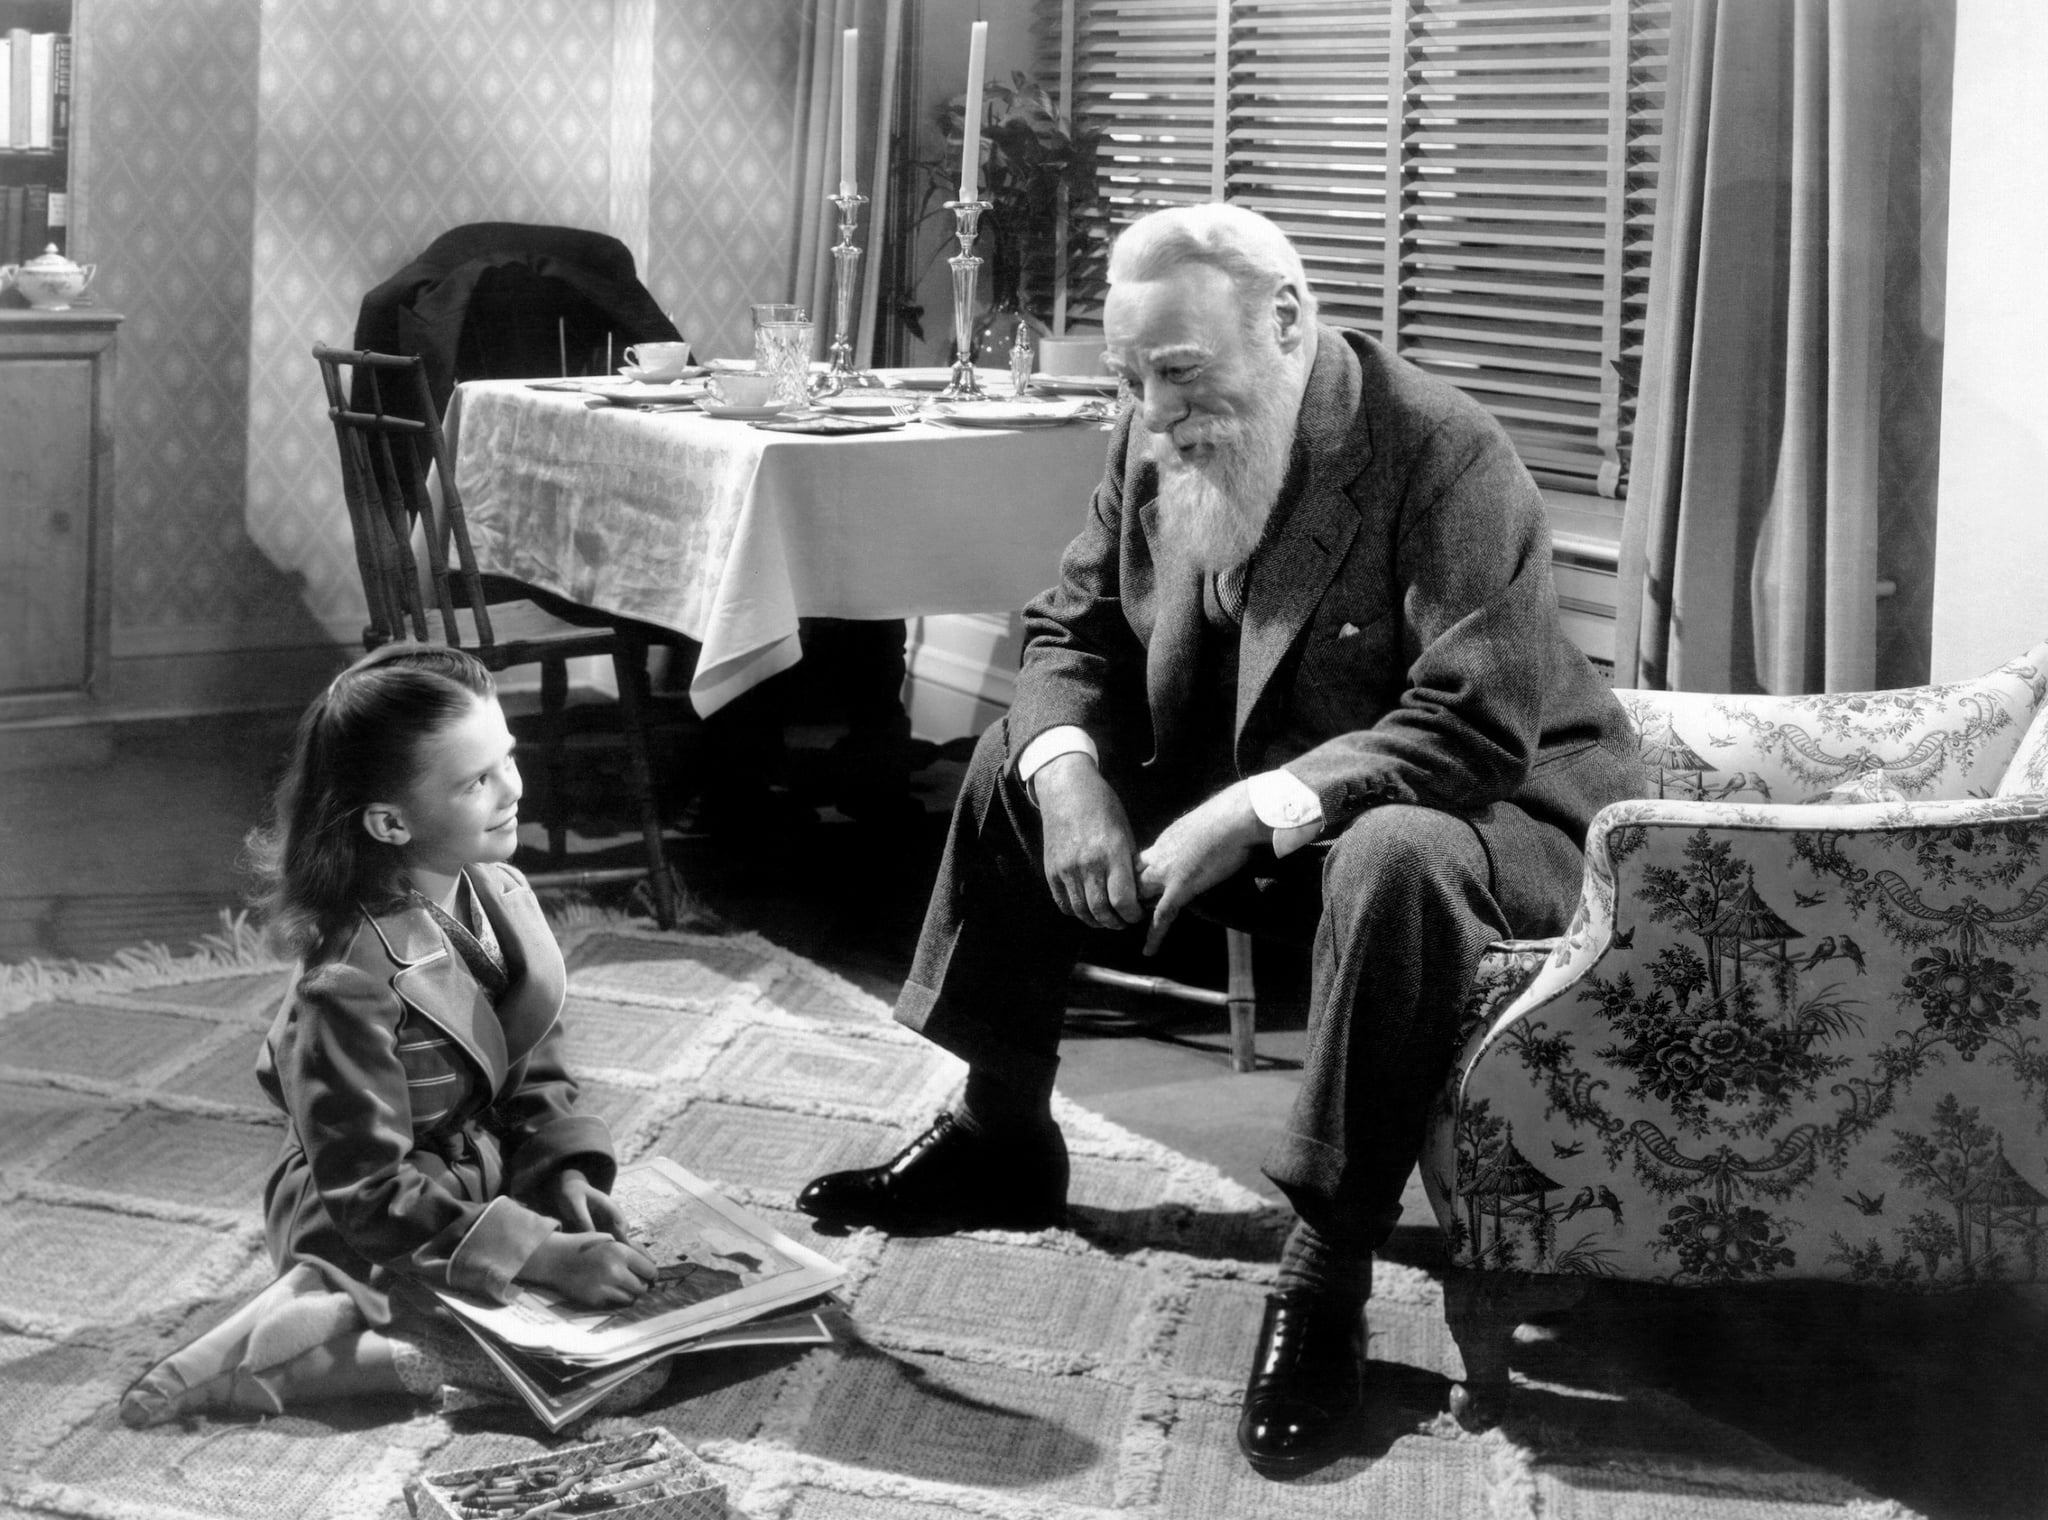 Susan Walker, seated on the floor, looks up at Kris Kringle, seated in a chair. Both are smiling at each other.